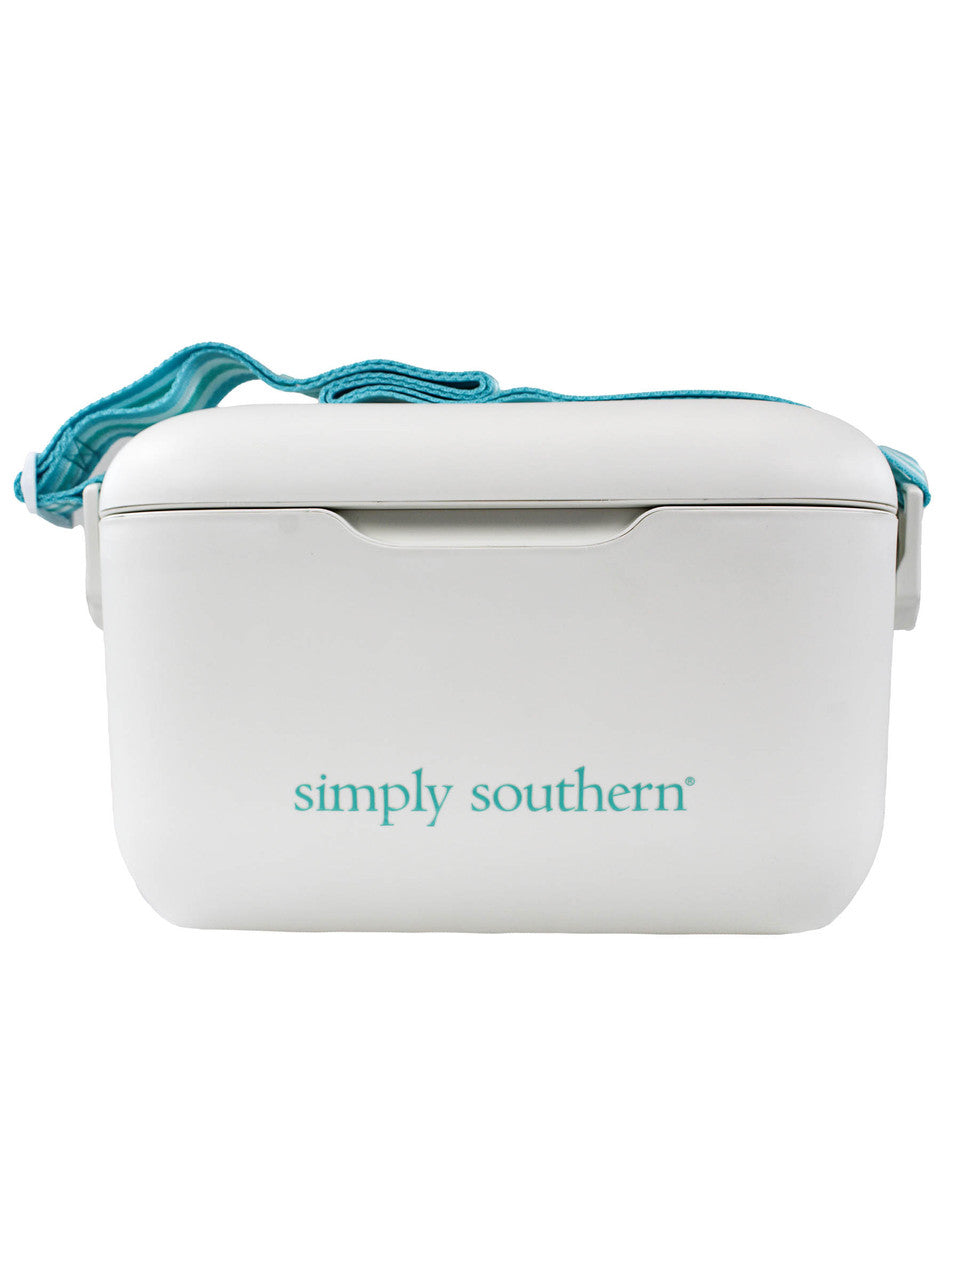 Simply Southern Vintage Style Cooler 13qt